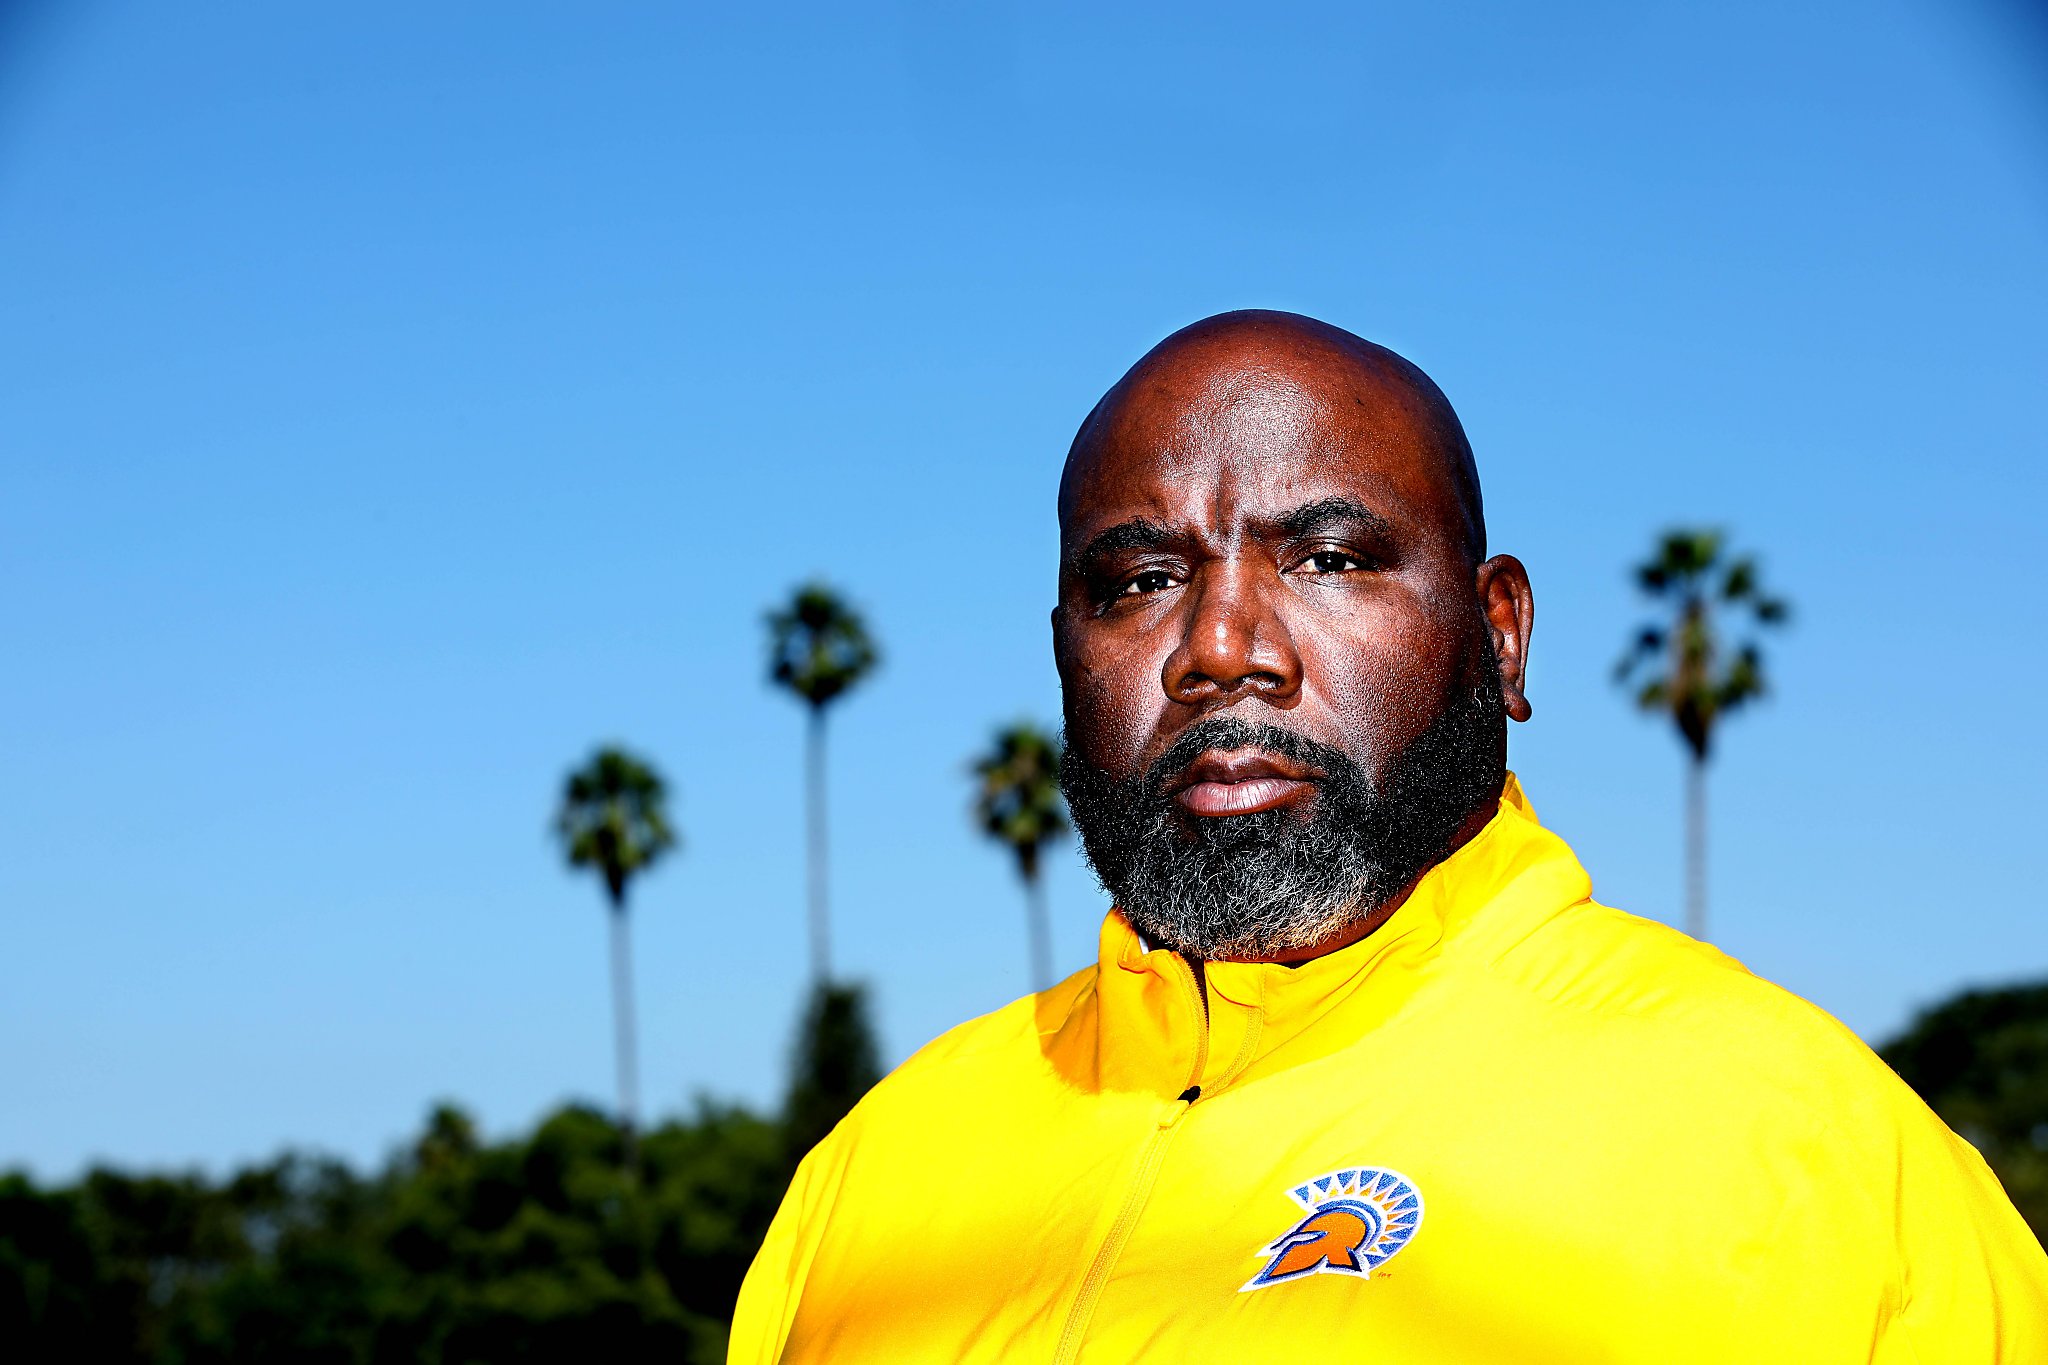 san-jose-state-football-coach-connects-hundreds-of-black-coaches-over-zoom